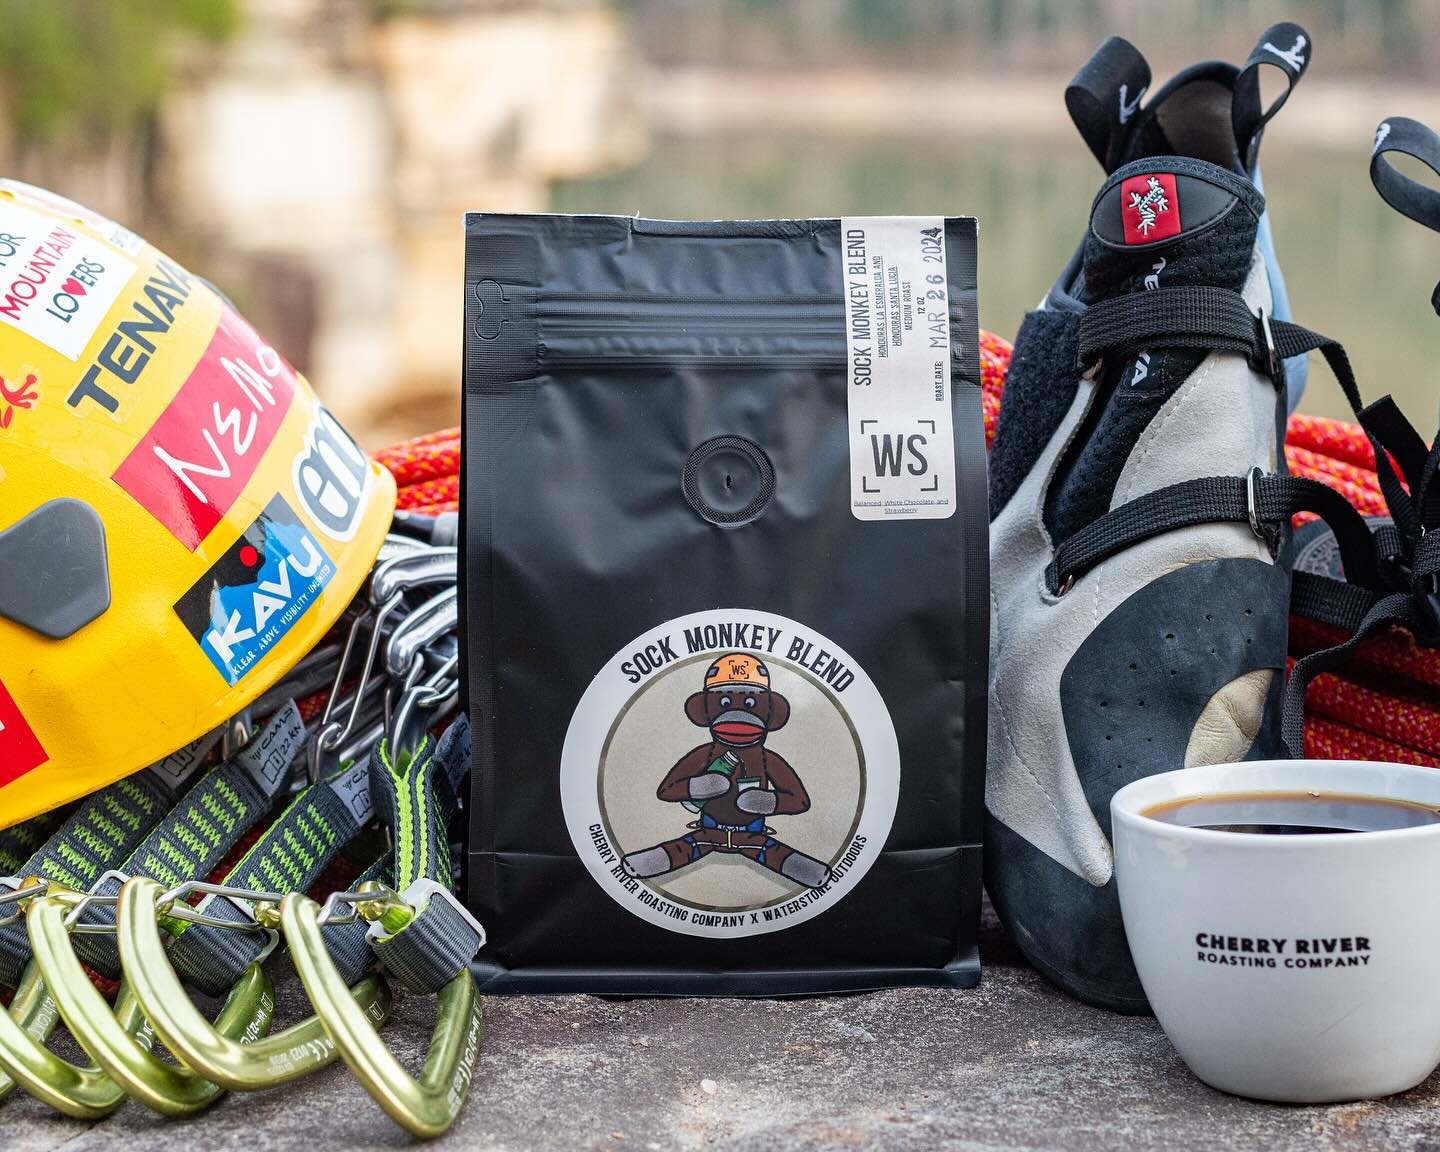 Introducing the Sock Monkey Blend! In partnership with our friends at Water Stone Outdoors located in Fayetteville, WV.

The Sock Monkey Blend is a perfect combination of our Honduras Santa Lucia and Honduras La Esmeralda. This blend brings a balance